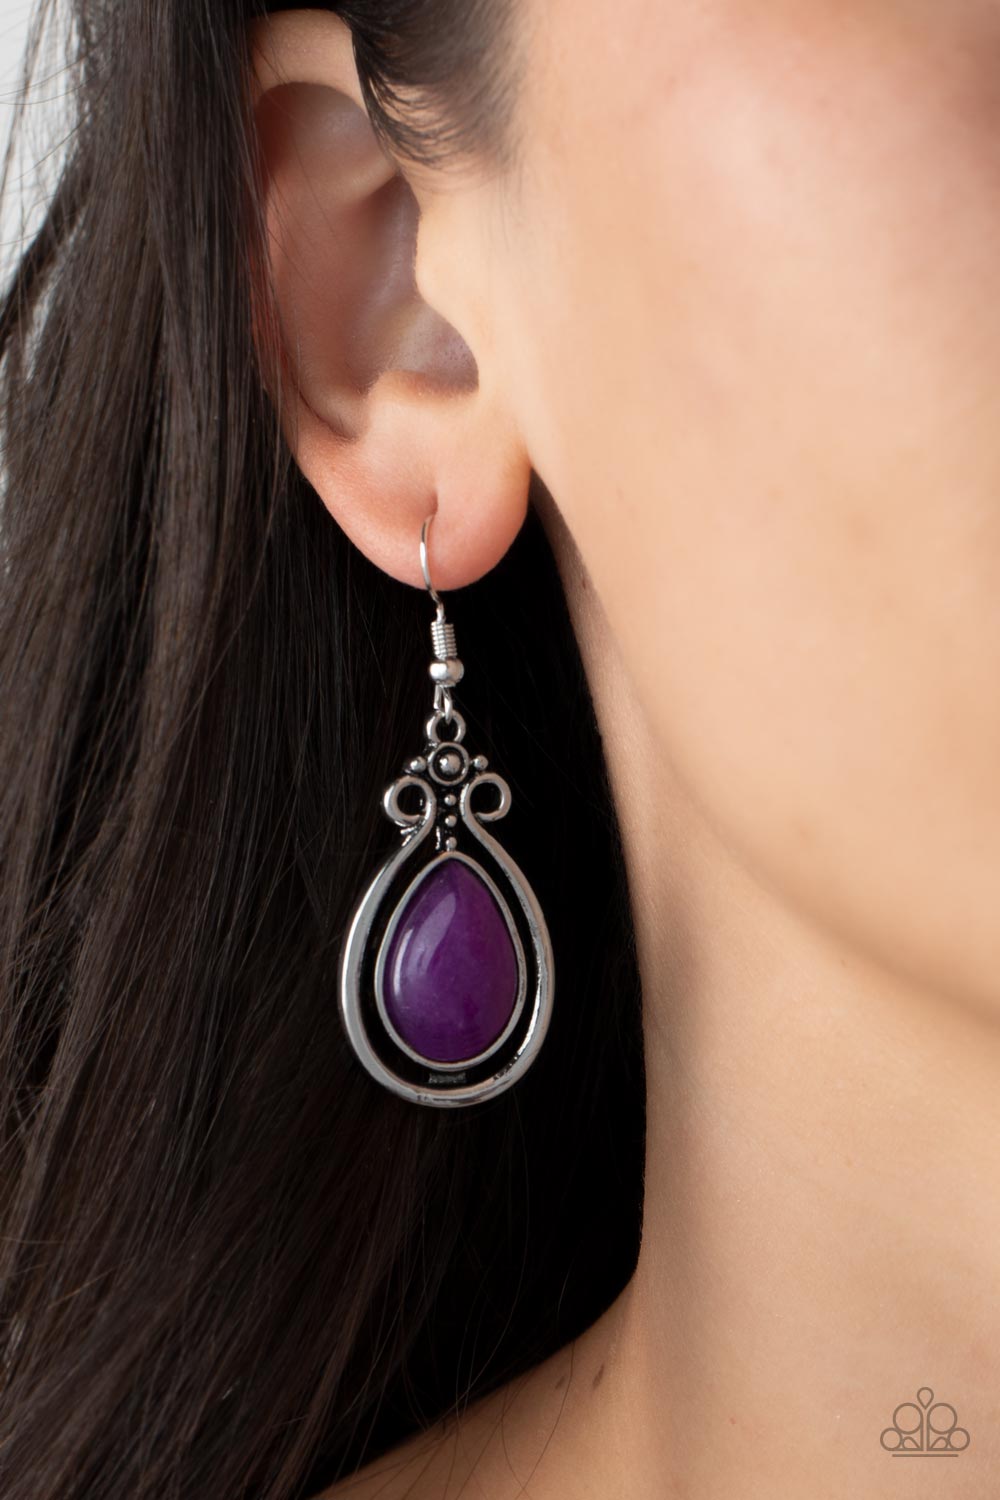 Mountain Mantra Purple Stone Earrings - Paparazzi Accessories-on model - CarasShop.com - $5 Jewelry by Cara Jewels